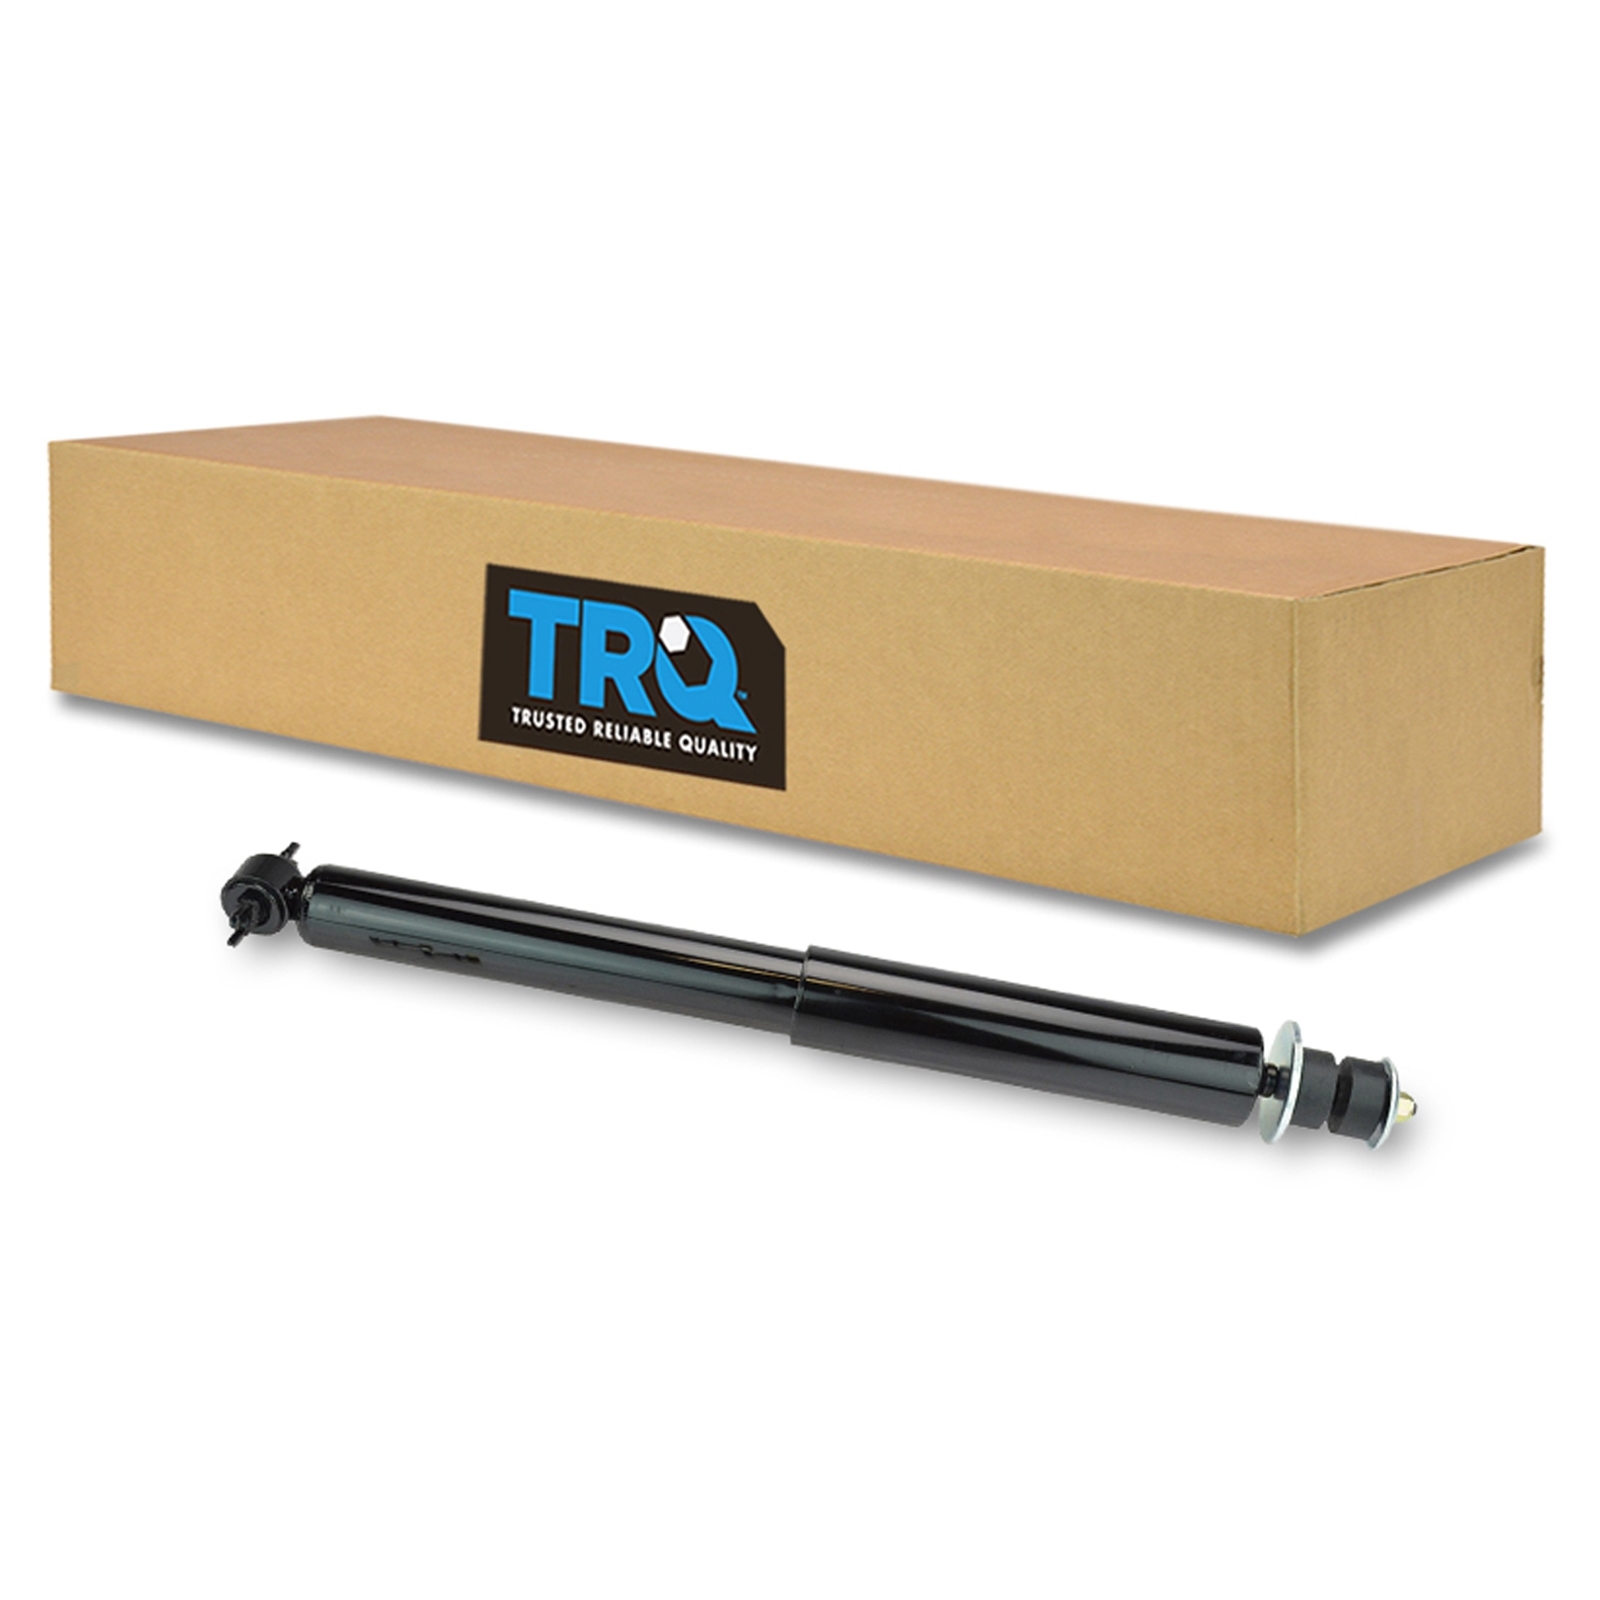 Trq Shock Absorber For 99-04 Grand Cherokee Front, Suspension Parts, HWNV-SBA60536